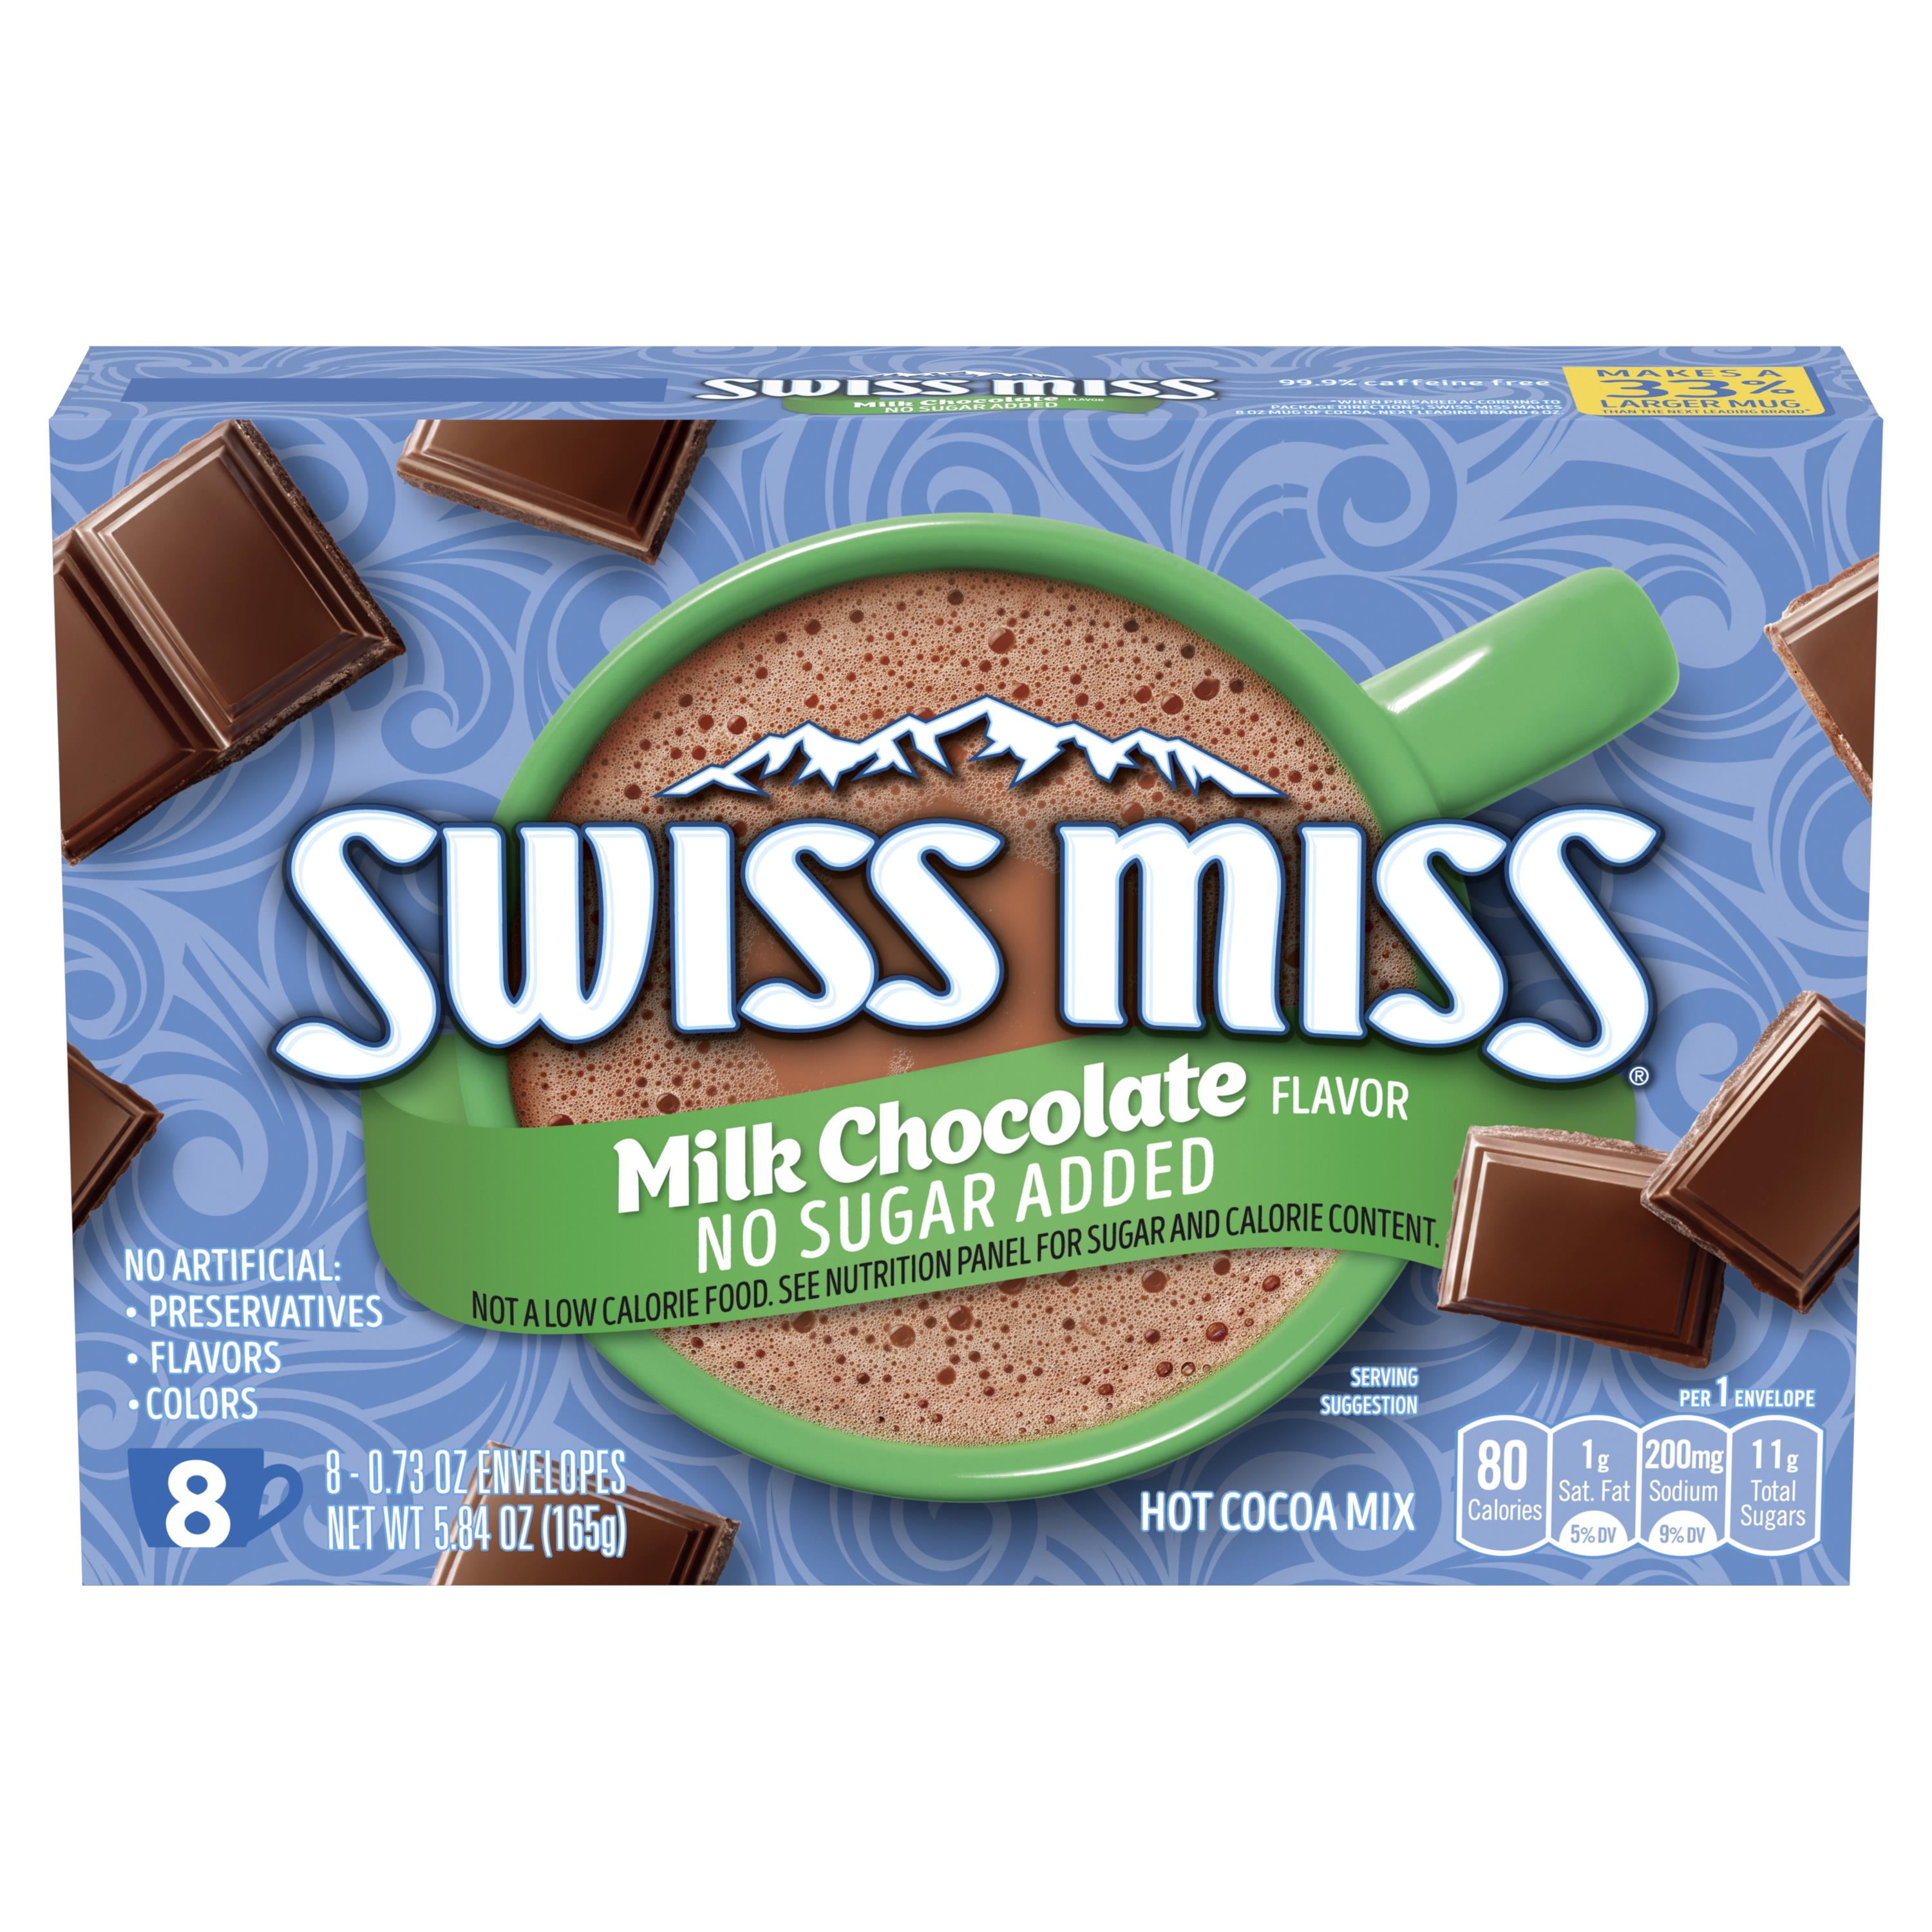 Swiss Miss No Sugar Added Milk Chocolate Flavored Hot Cocoa Mix, 8 Count